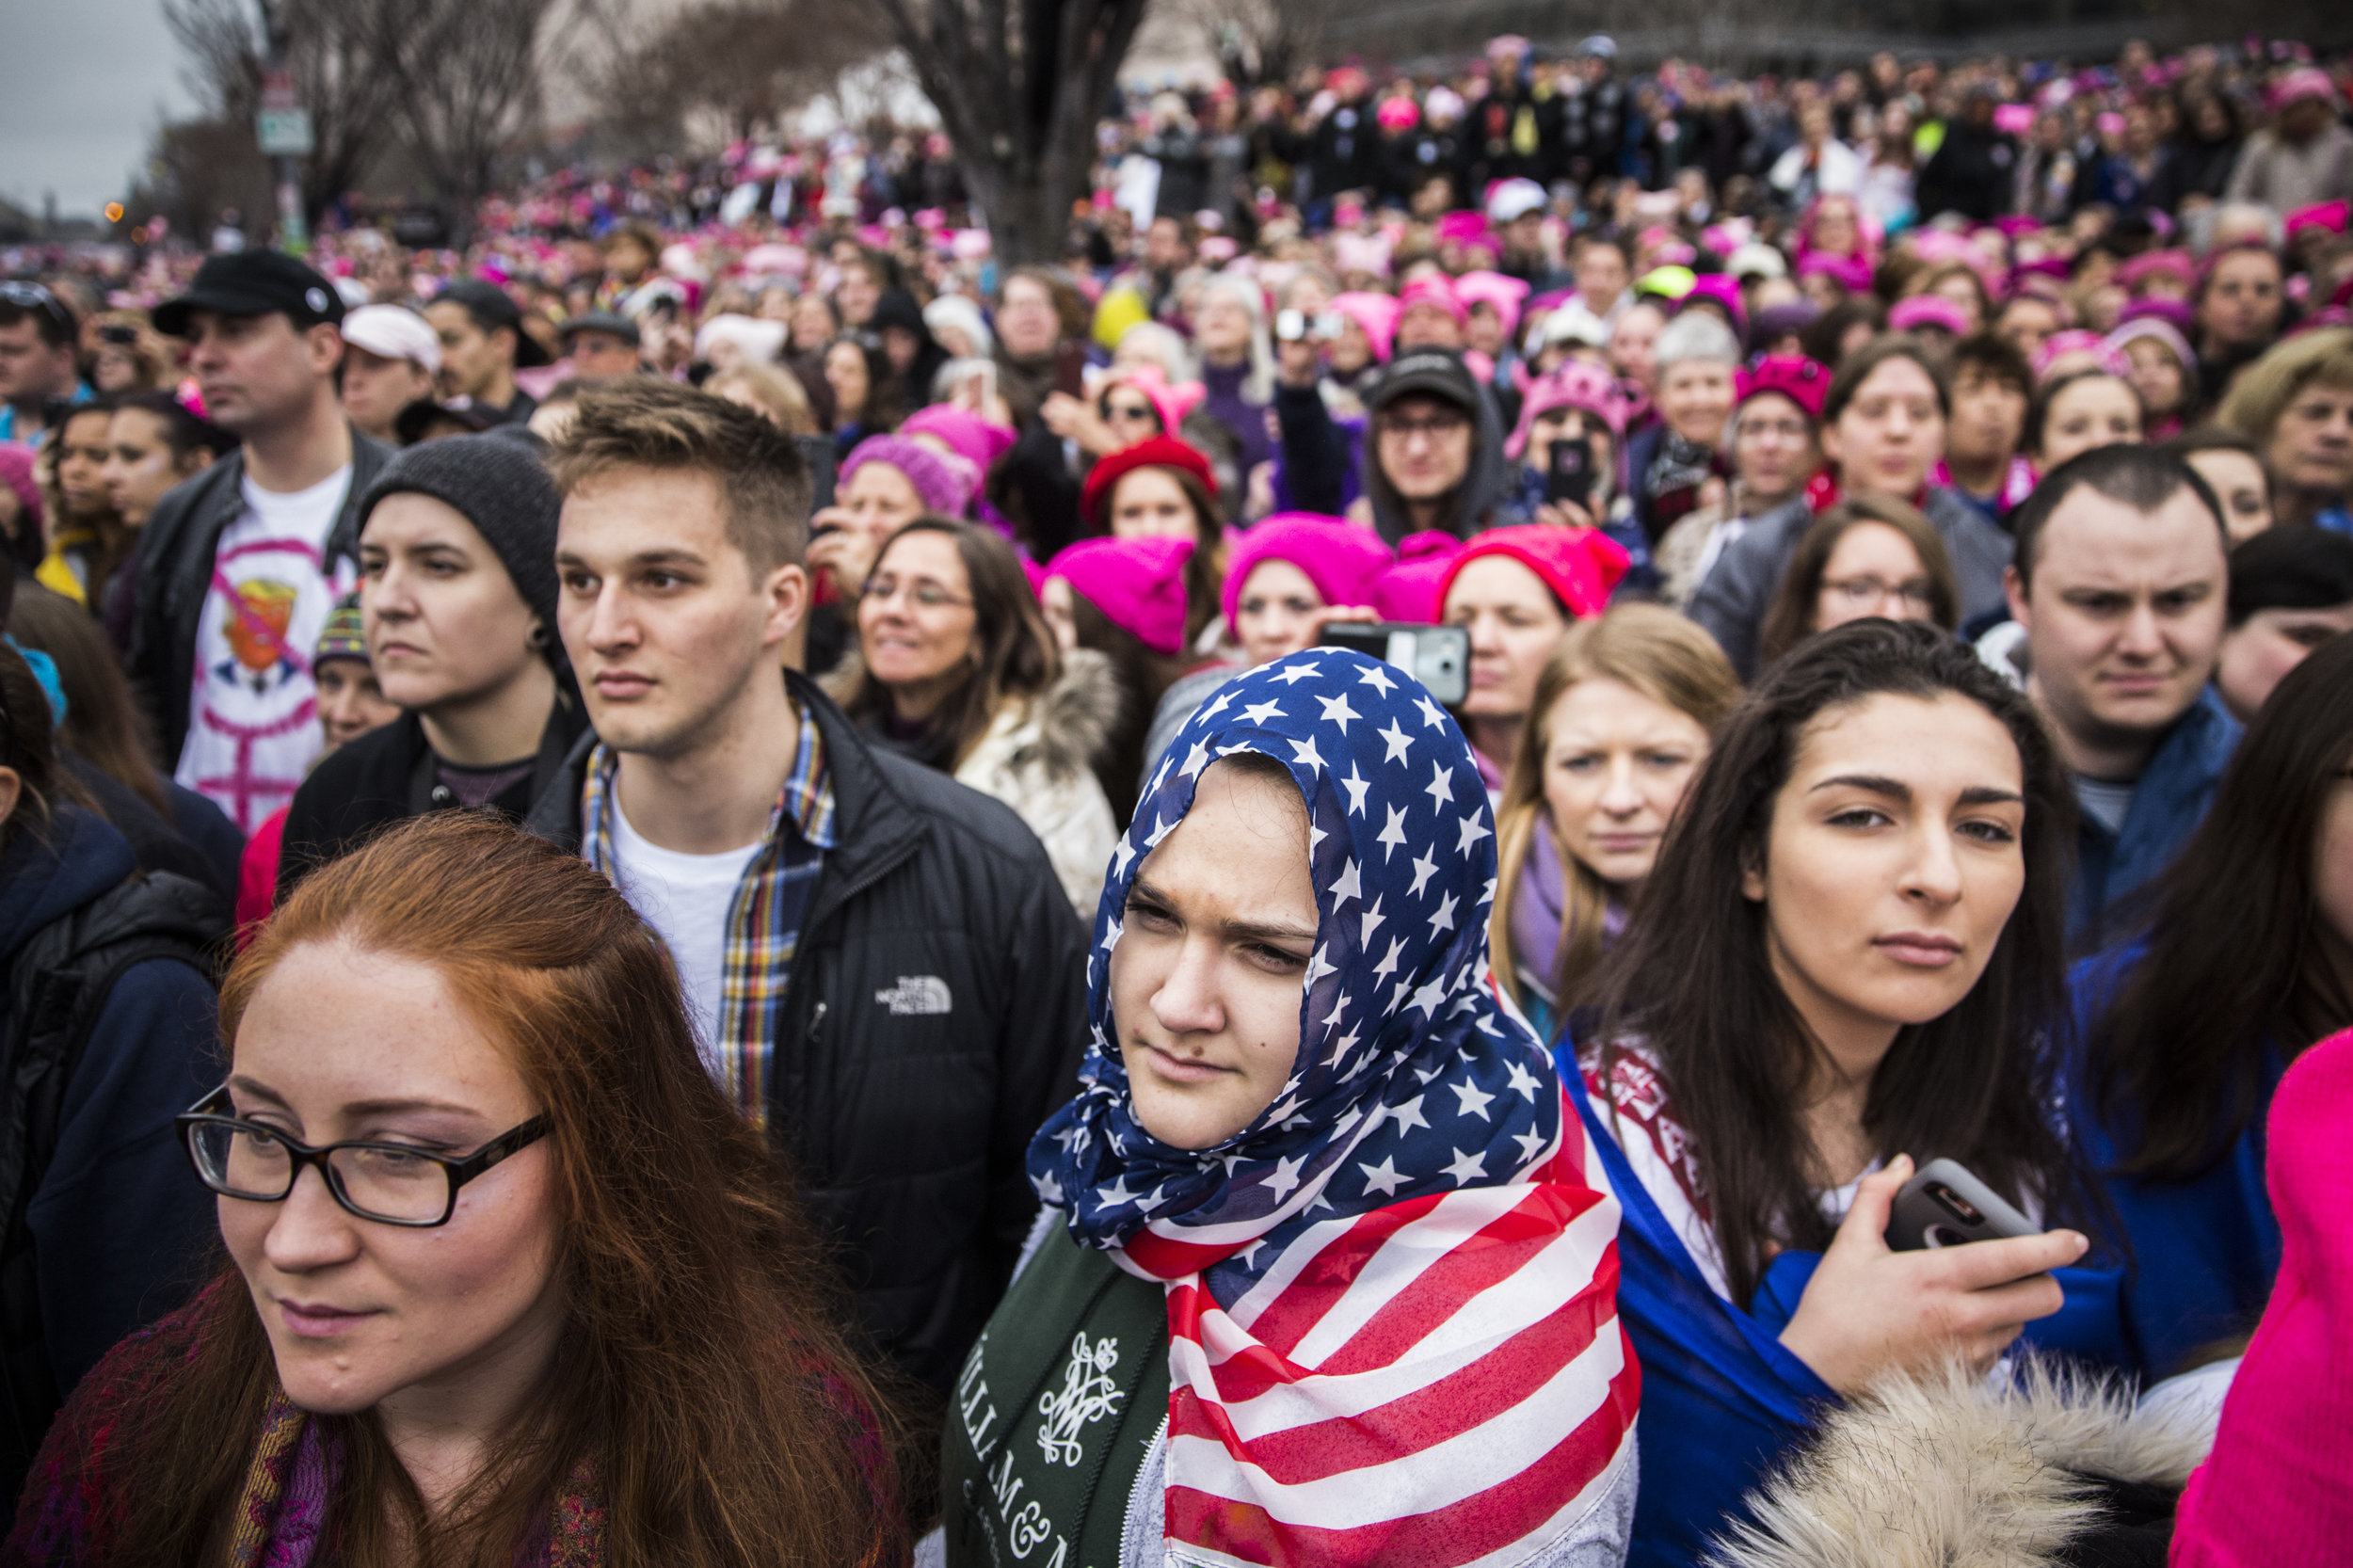  A protester wearing an American flag as a hijab stands amidst the crowd at Women's March on Washington 